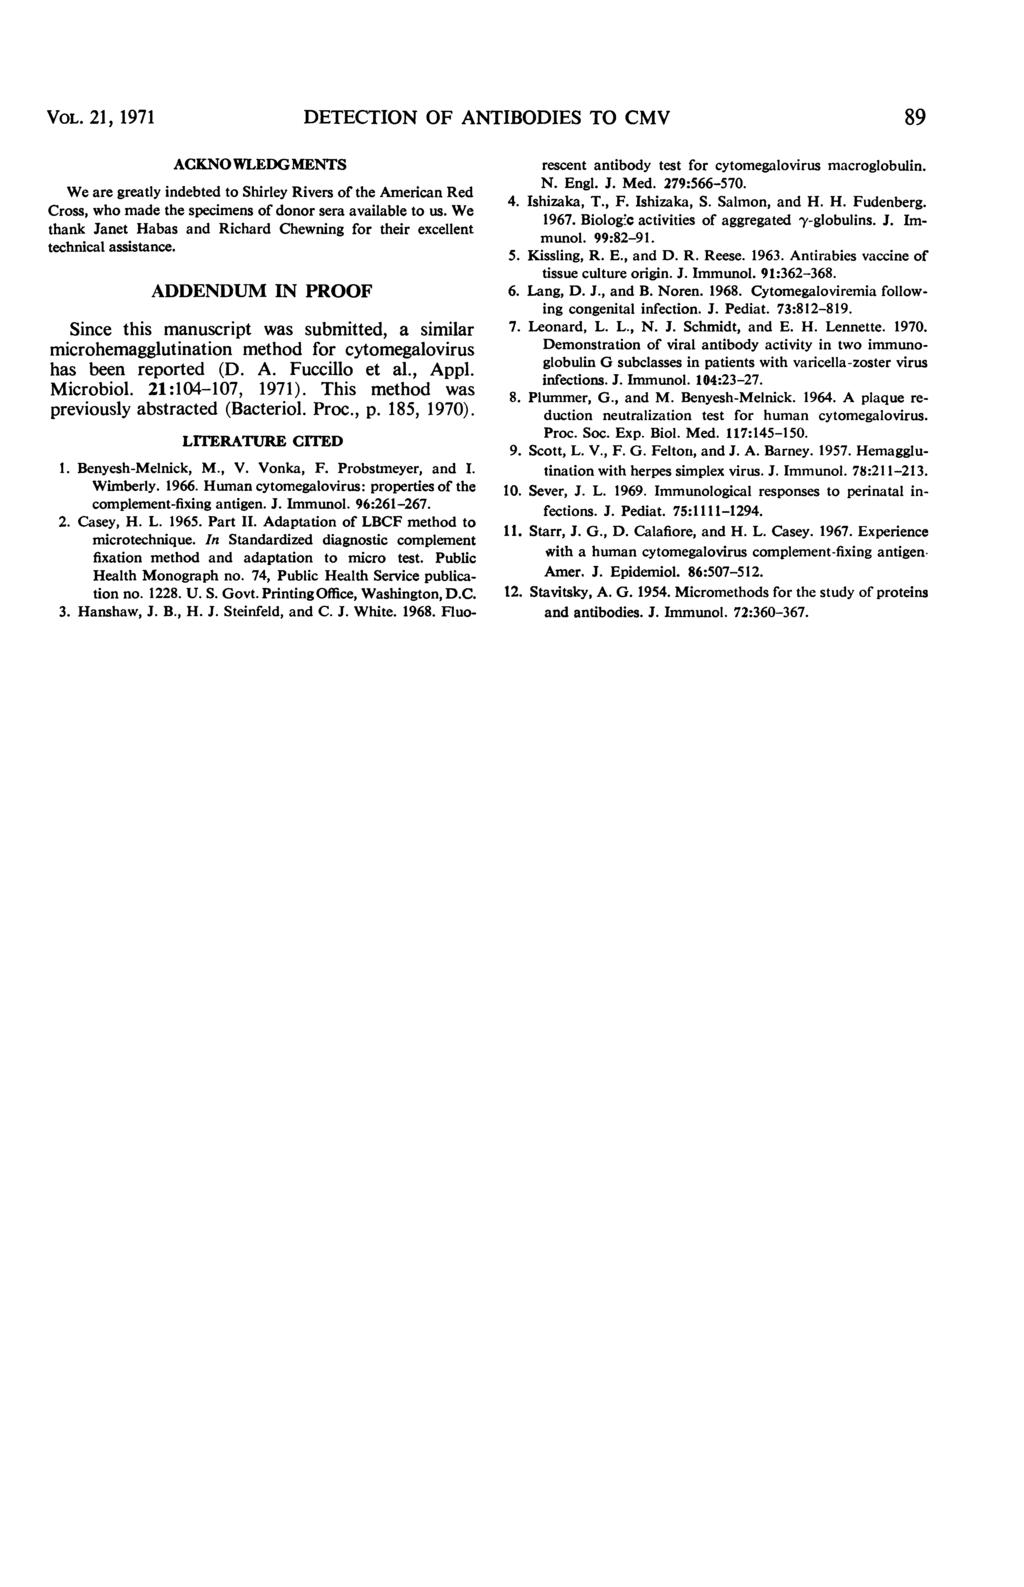 VOL. 21, 1971 DETECTION OF ANTIBODIES TO CMV 89 ACKNOWLEDGMENTS We are greatly indebted to Shirley Rivers of the American Red Cross, who made the specimens of donor sera available to us.